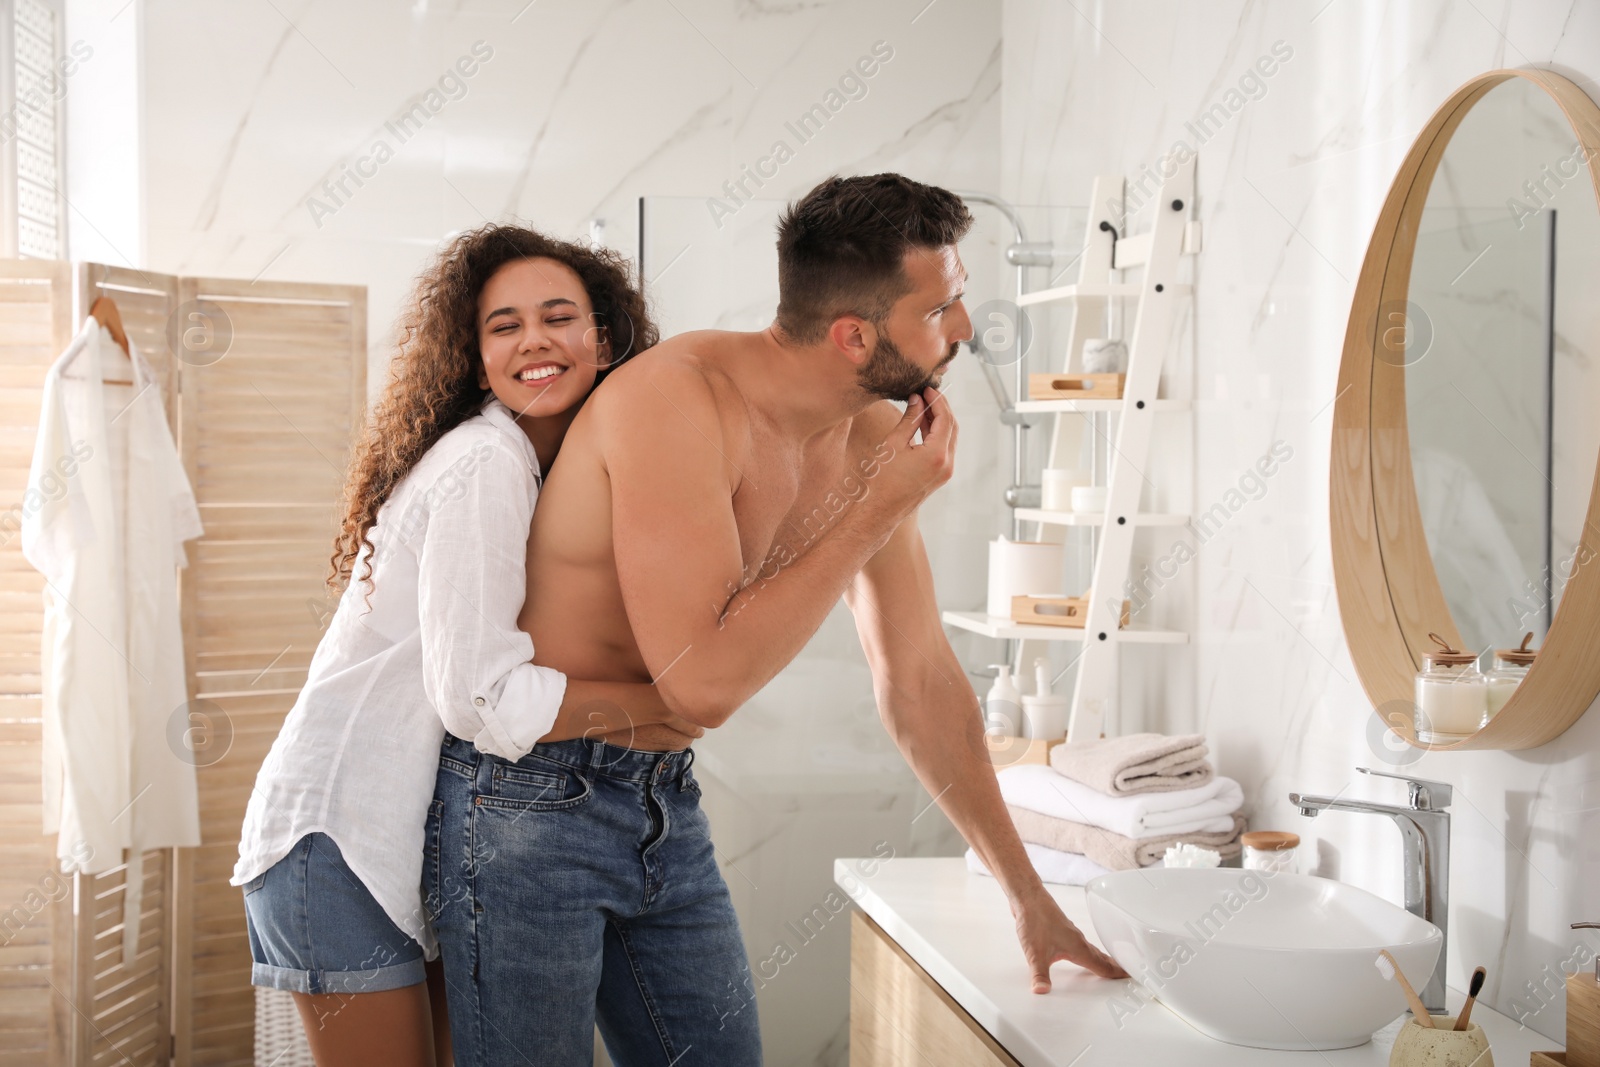 Photo of Lovely couple enjoying each other in bathroom at home